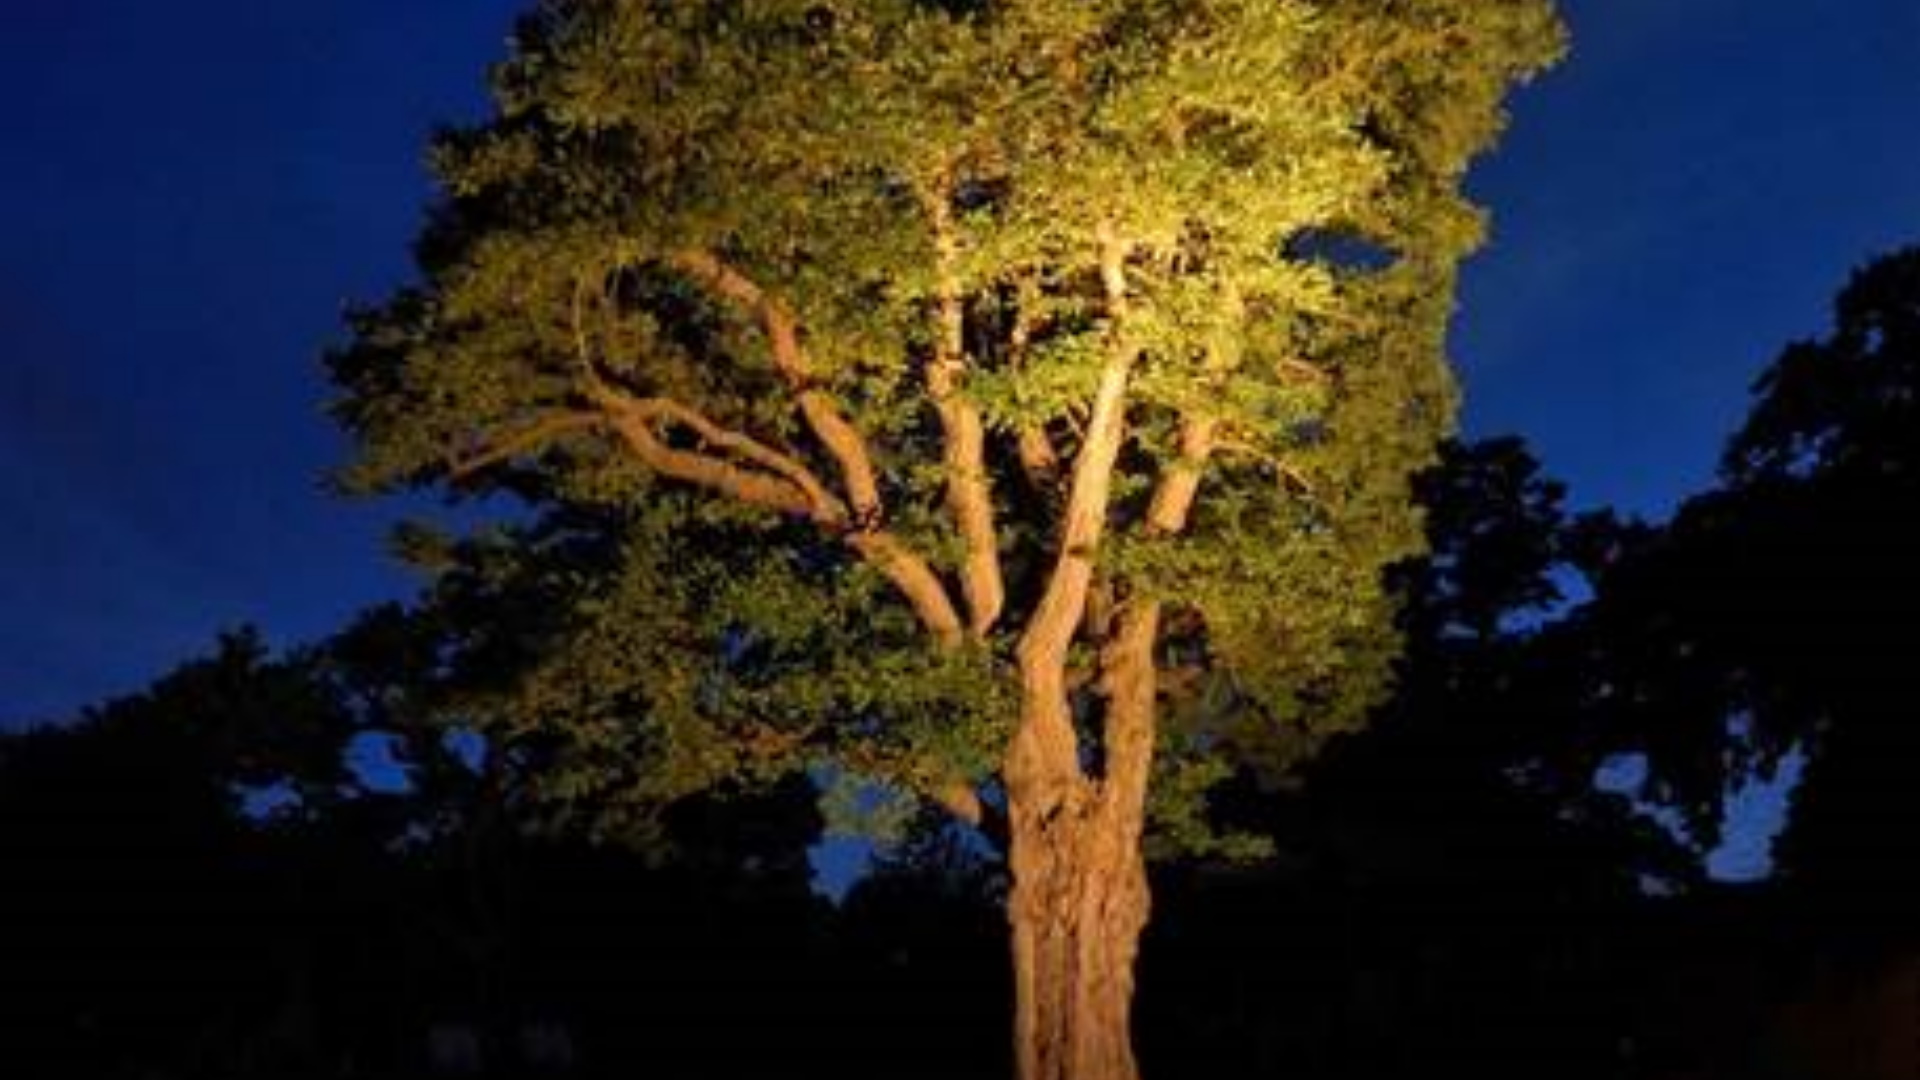 Outdoor Lights: an introduction to lighting trees